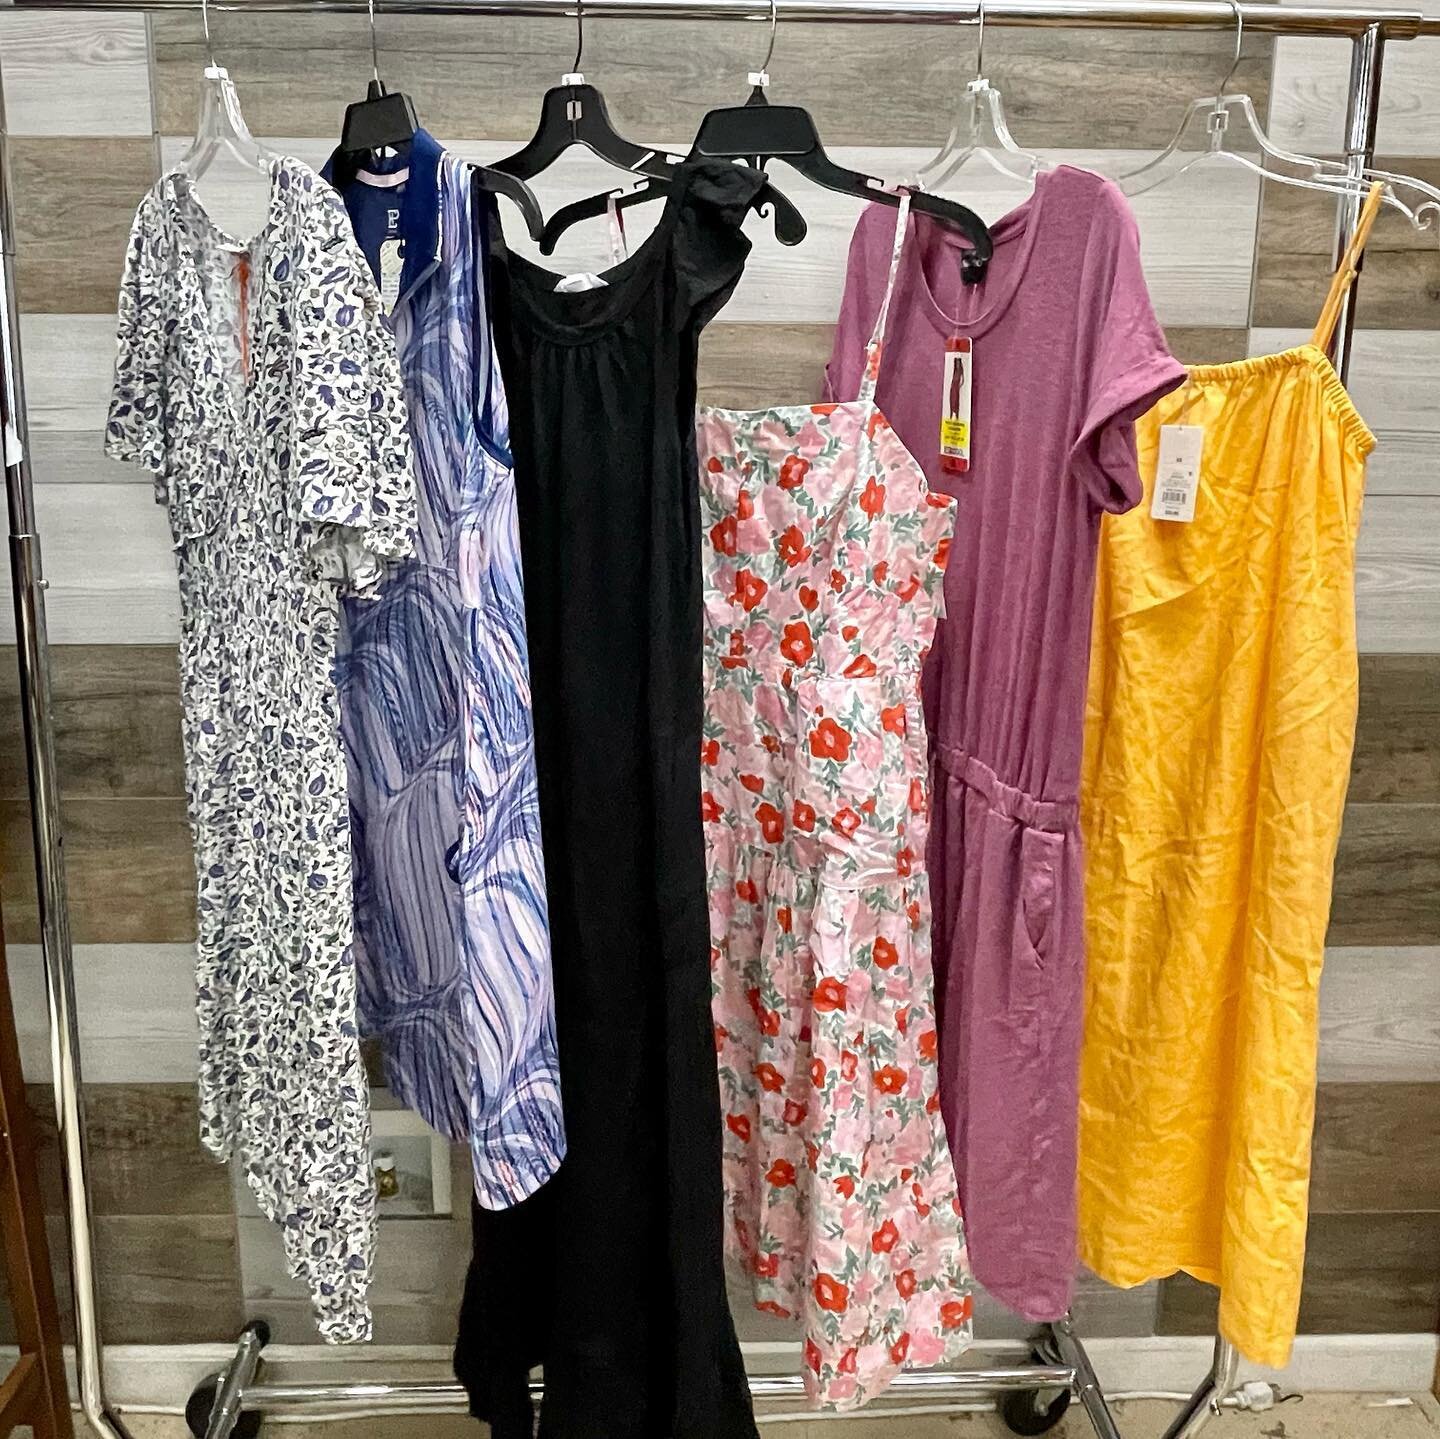 Now through Saturday, all dresses are an additional 25% off!! we have a huge selection of formal, casual, and summer dresses from Target, JCPenney, Walmart, and Costco!

📍 11407 N Government Way

#coeurdalene #cdaidaho #idaho #northidaho #postfalls 